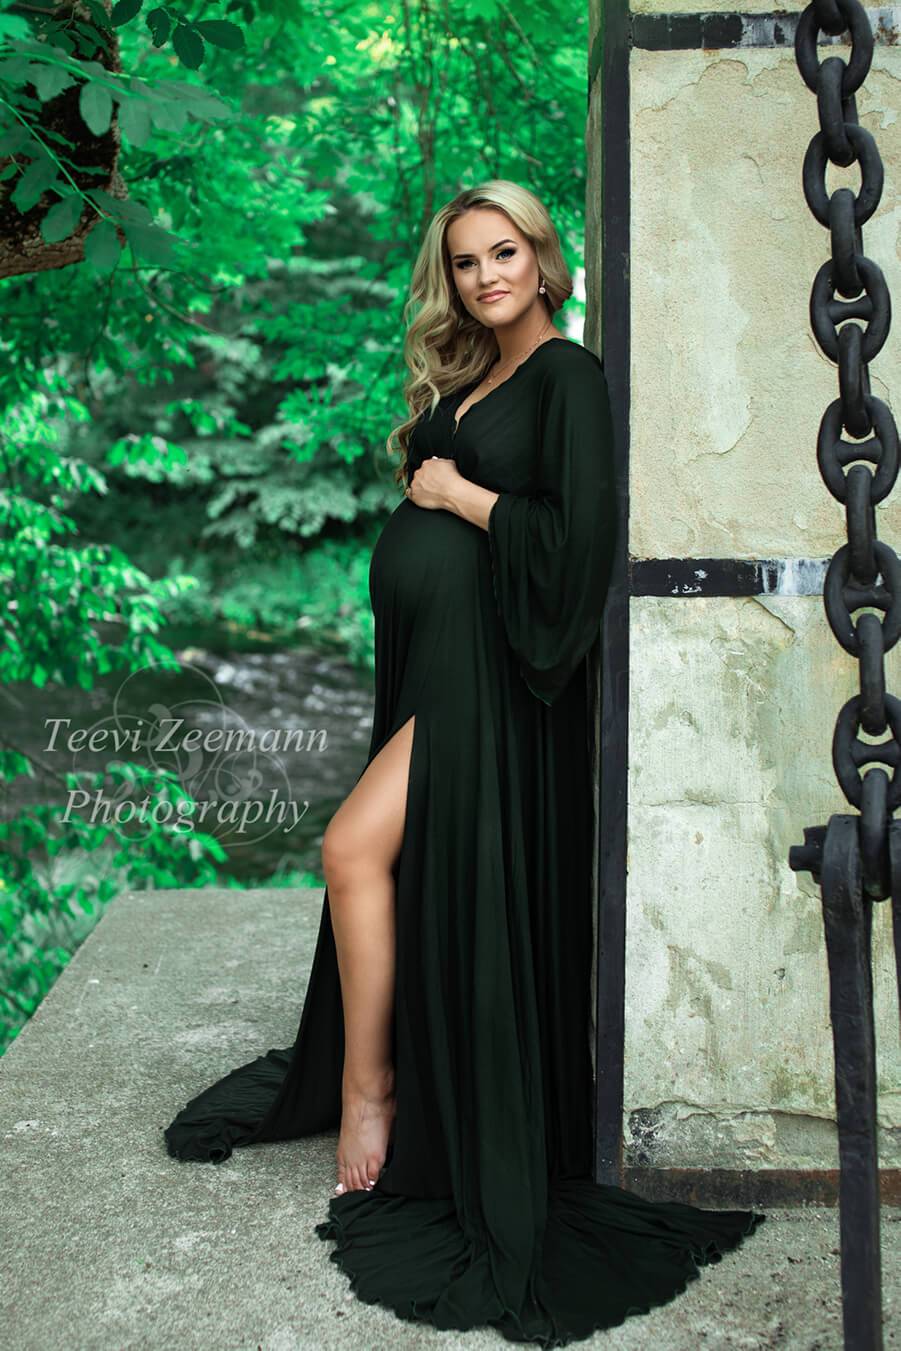 This pregnant model is leaning against a wall in a garden. She is wearing a dark green maternity dress with a split by the leg. She has her hands on her belly